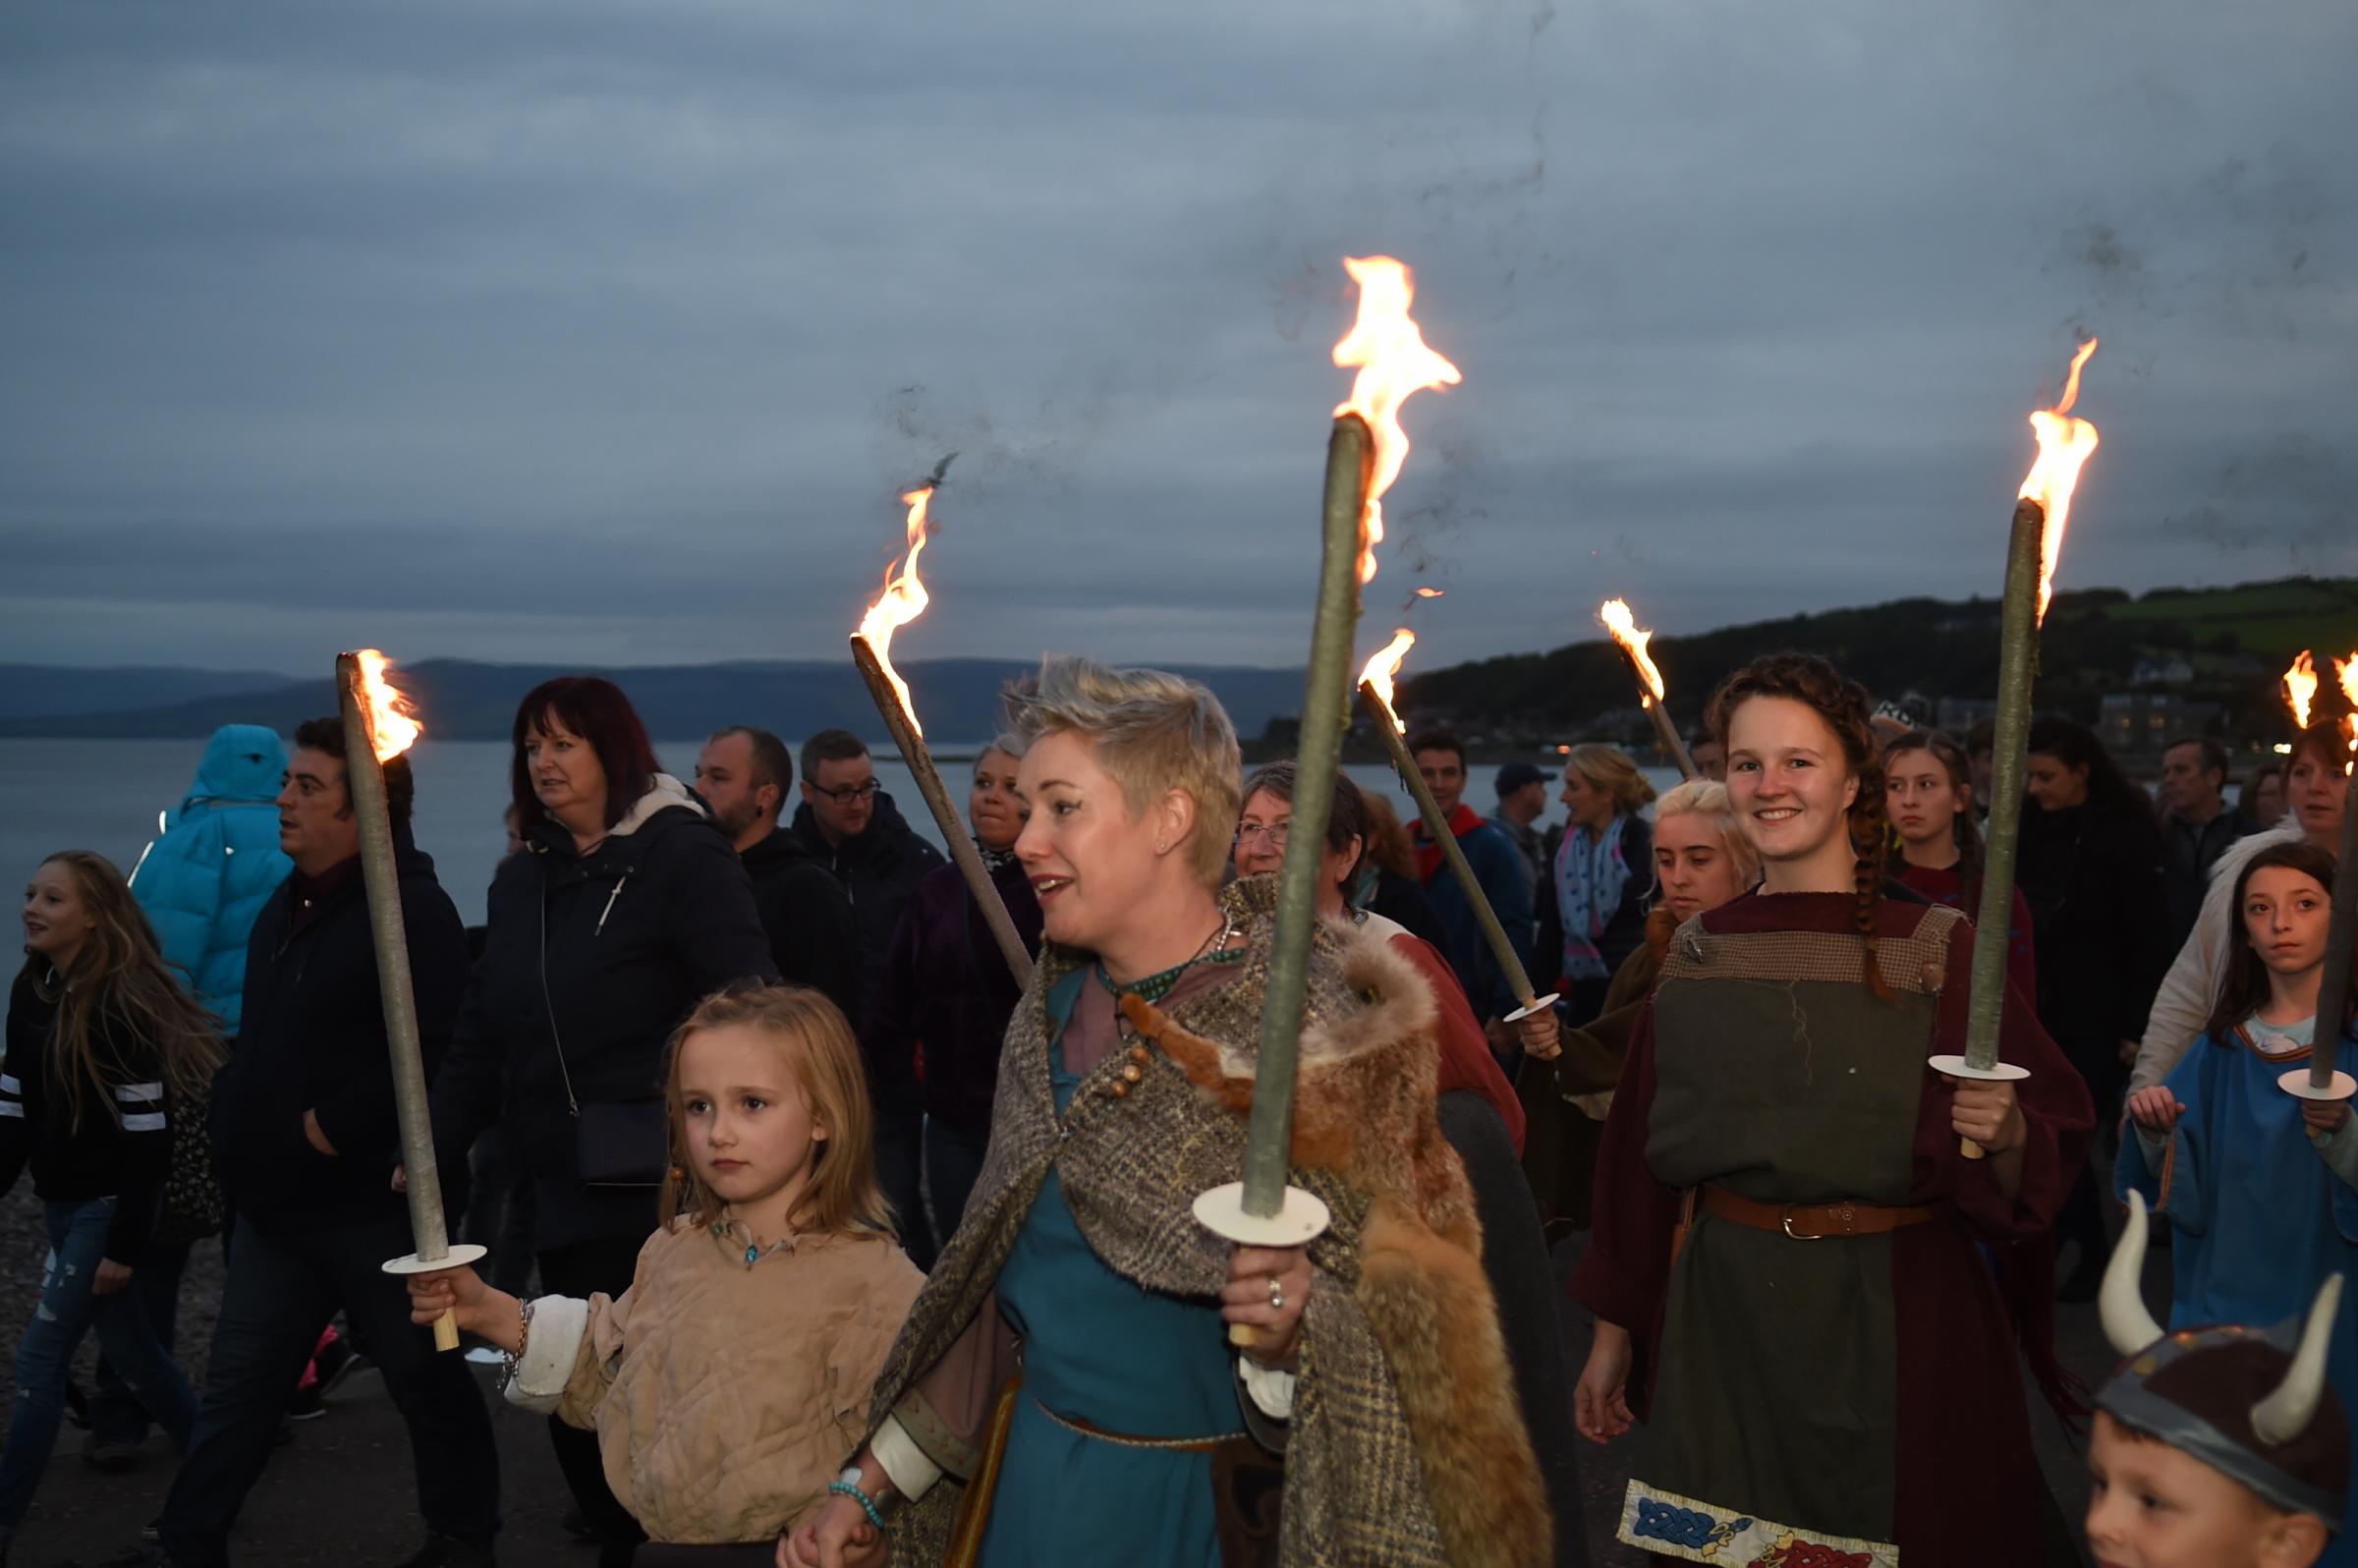 Largs Viking Festival England : Experience transforming into a unique Viking warrior in North Ayrshire